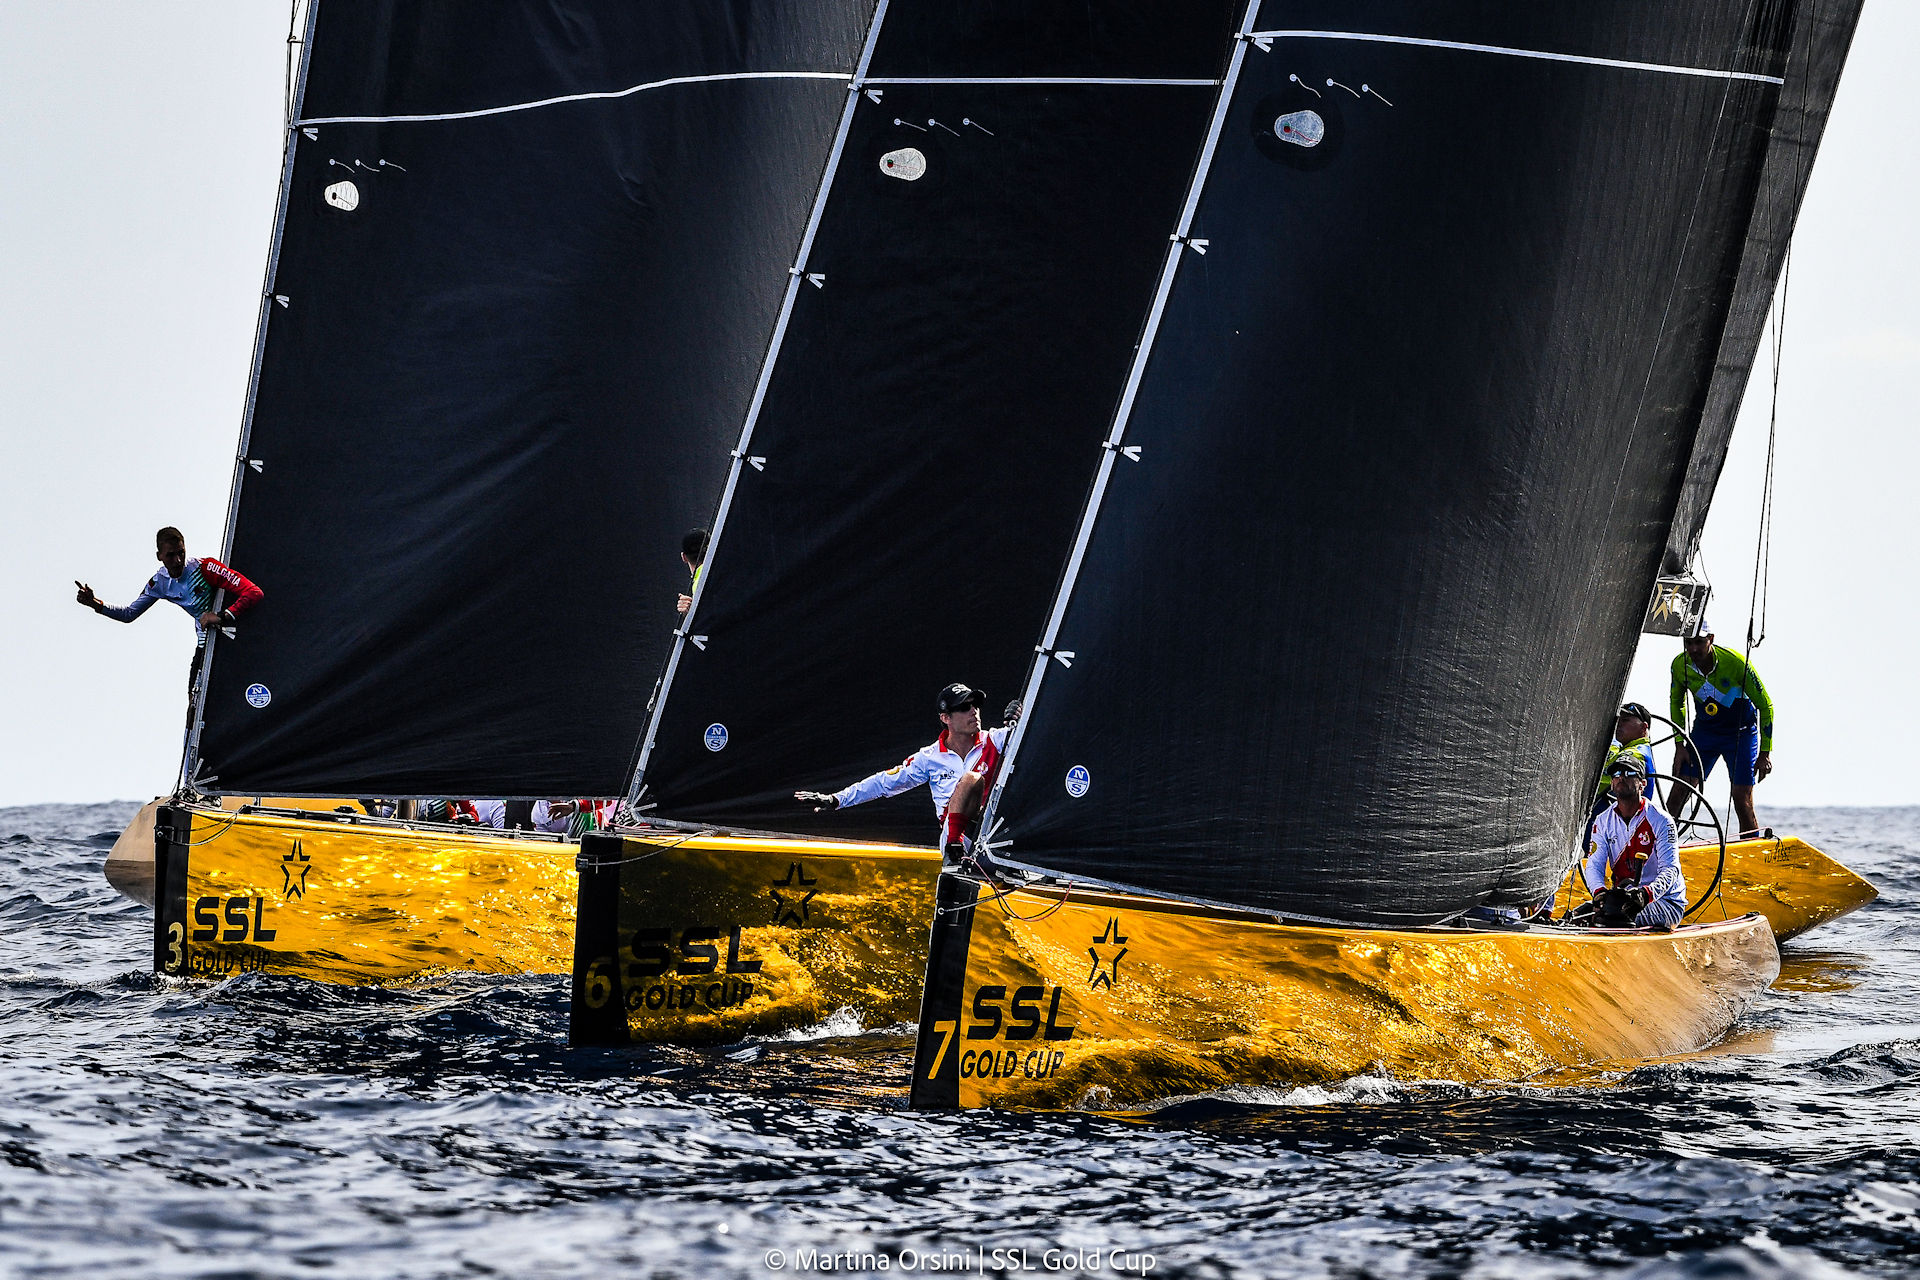 ALL CHANGE ON MOVING DAY AT THE SSL GOLD CUP FINAL SERIES IN GRAN CANARIA